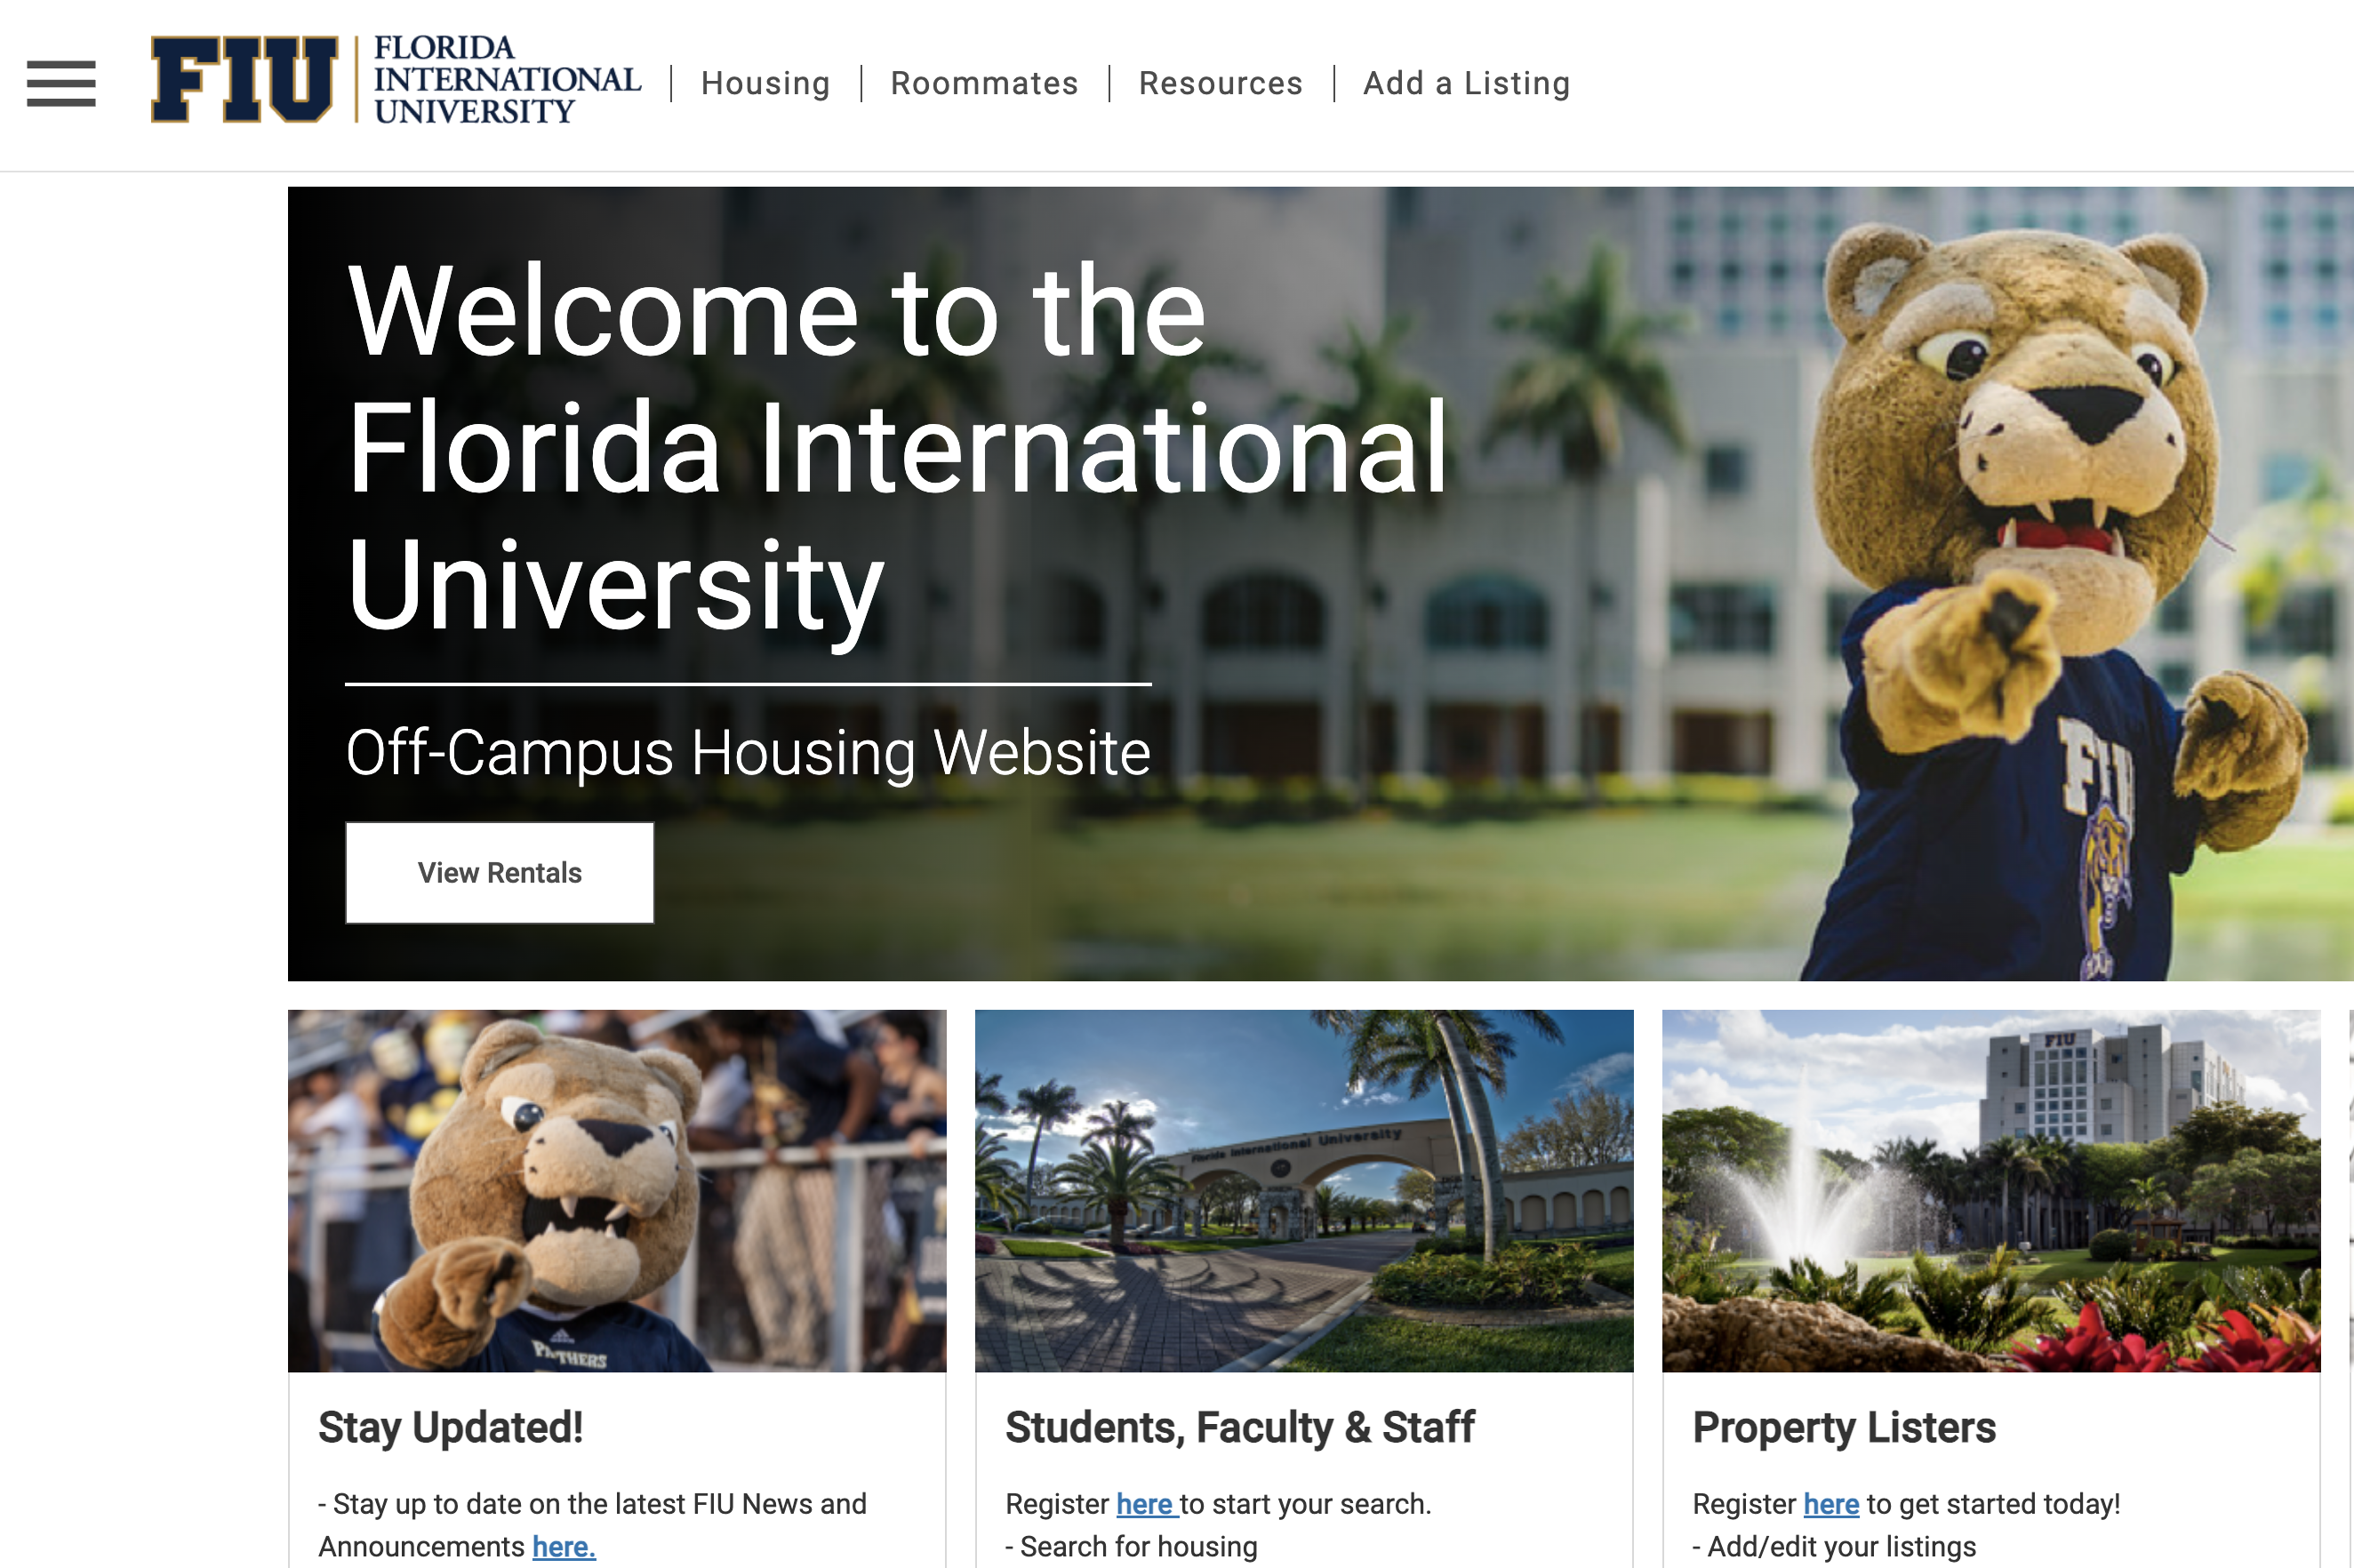 FIU employees and Roary